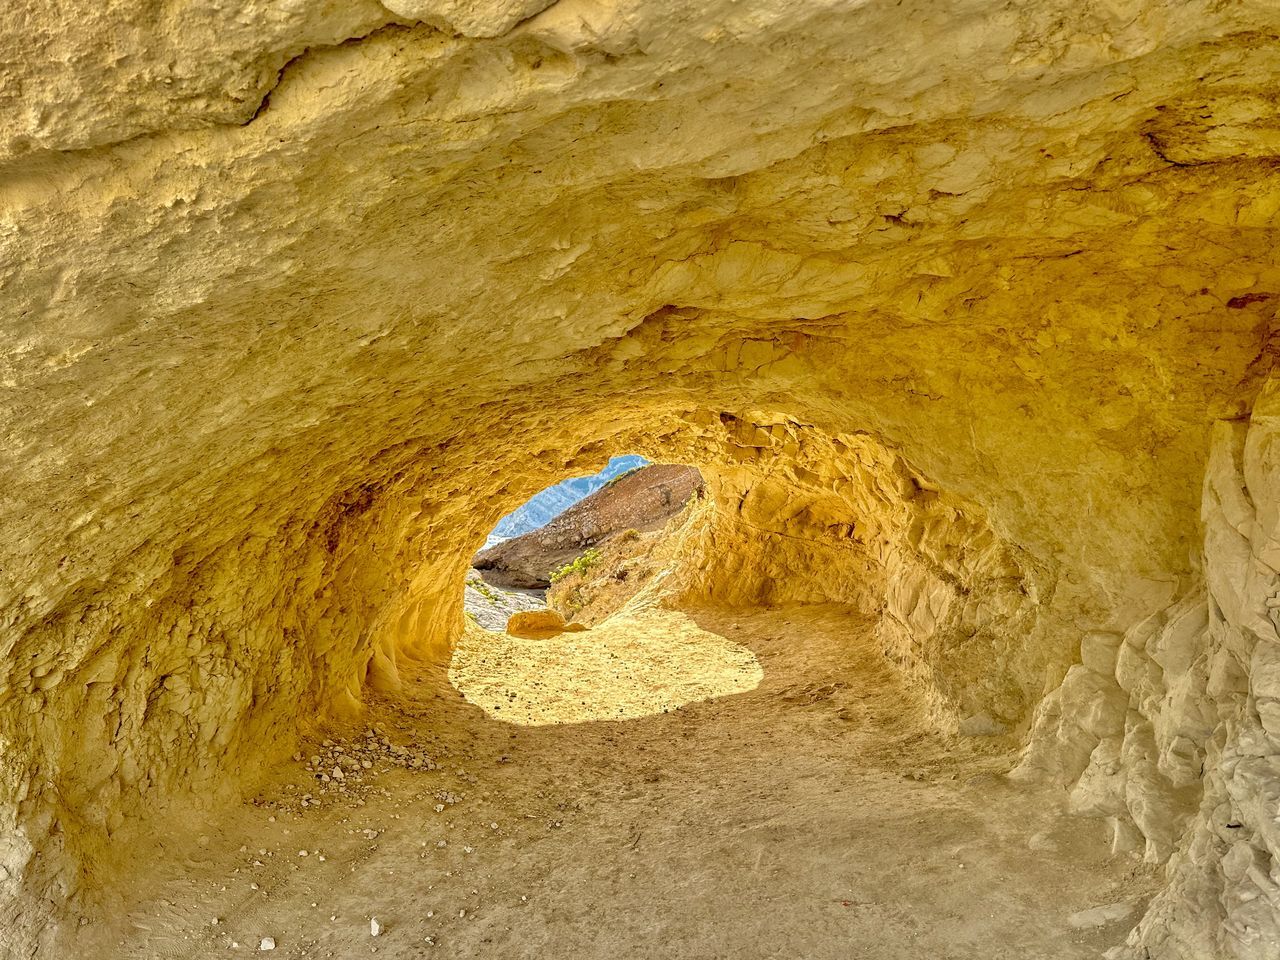 Cave No People Rock Geology Day Nature Architecture Rock Formation Textured  Yellow Hole Outdoors Tunnel Physical Geography Formation Built Structure Arch Beauty In Nature Rough Ancient History